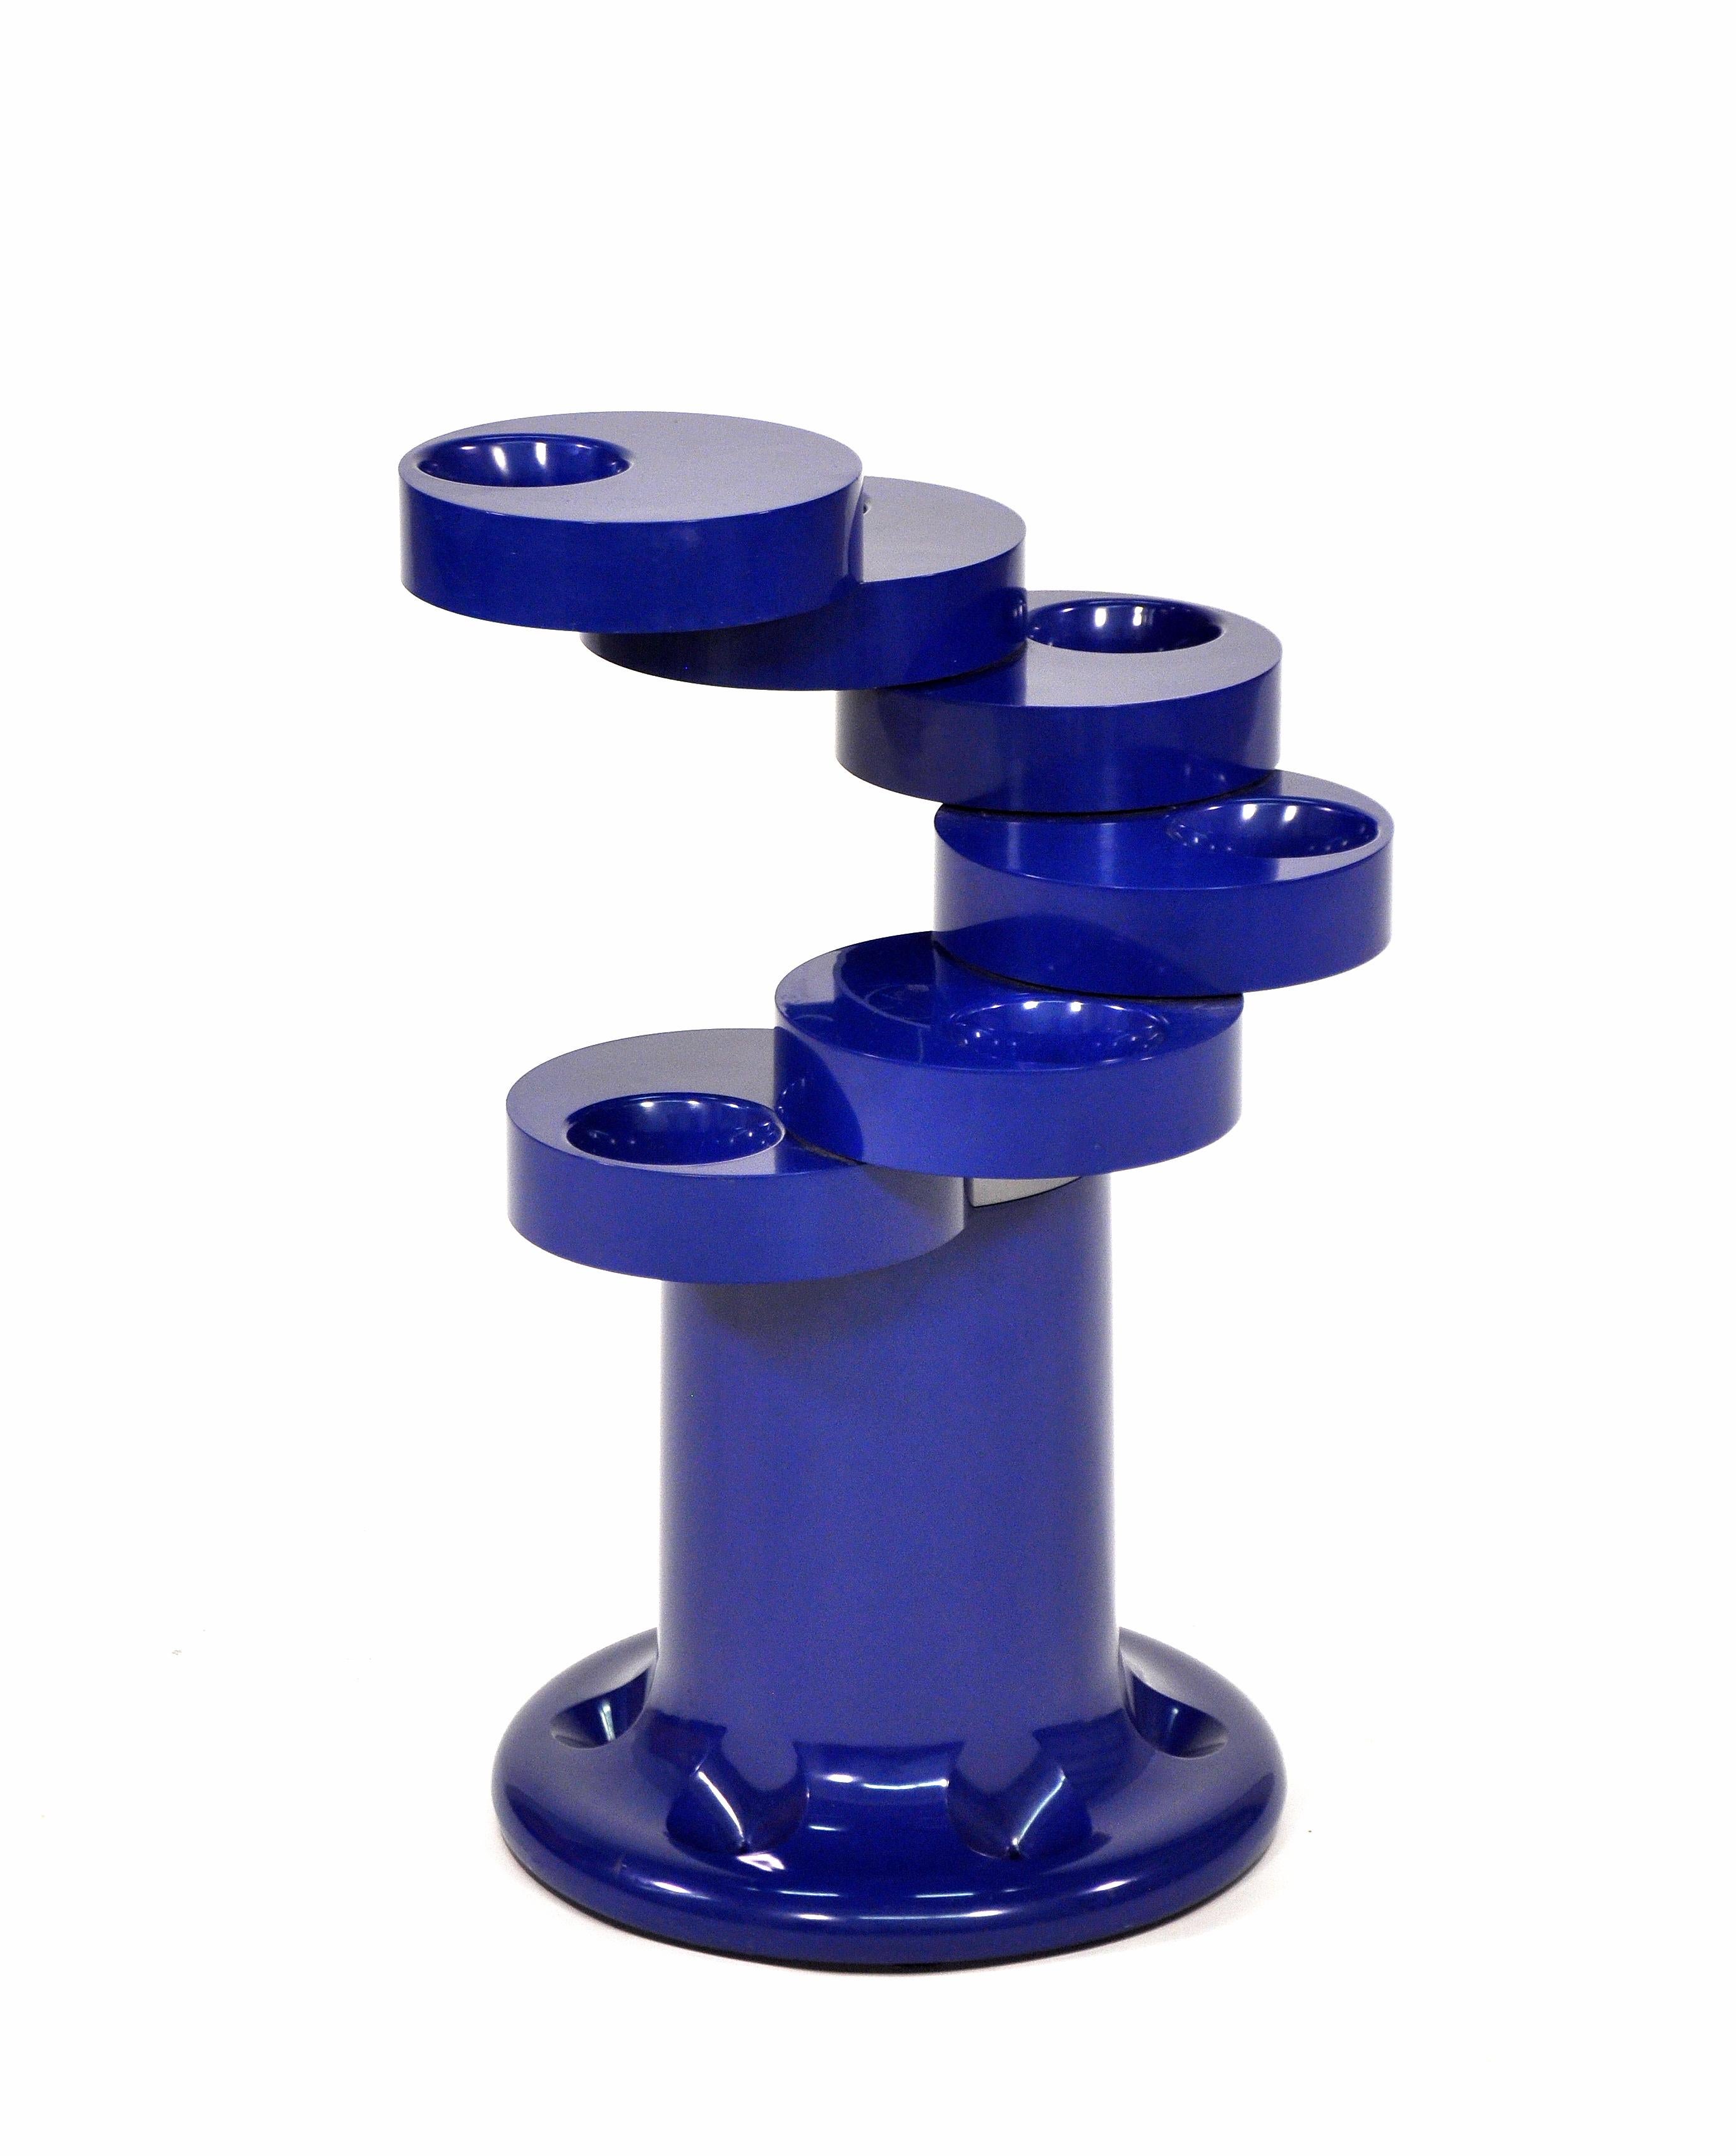 Vintage cobalt blue Pluvium umbrella stand designed by Giancarlo Piretti for Anonima Castelli, dating from the 1970s. The rotating disks allow up to 6 umbrellas to be stored. A rare and collectible Italian Mid-Century Modern design that can add a